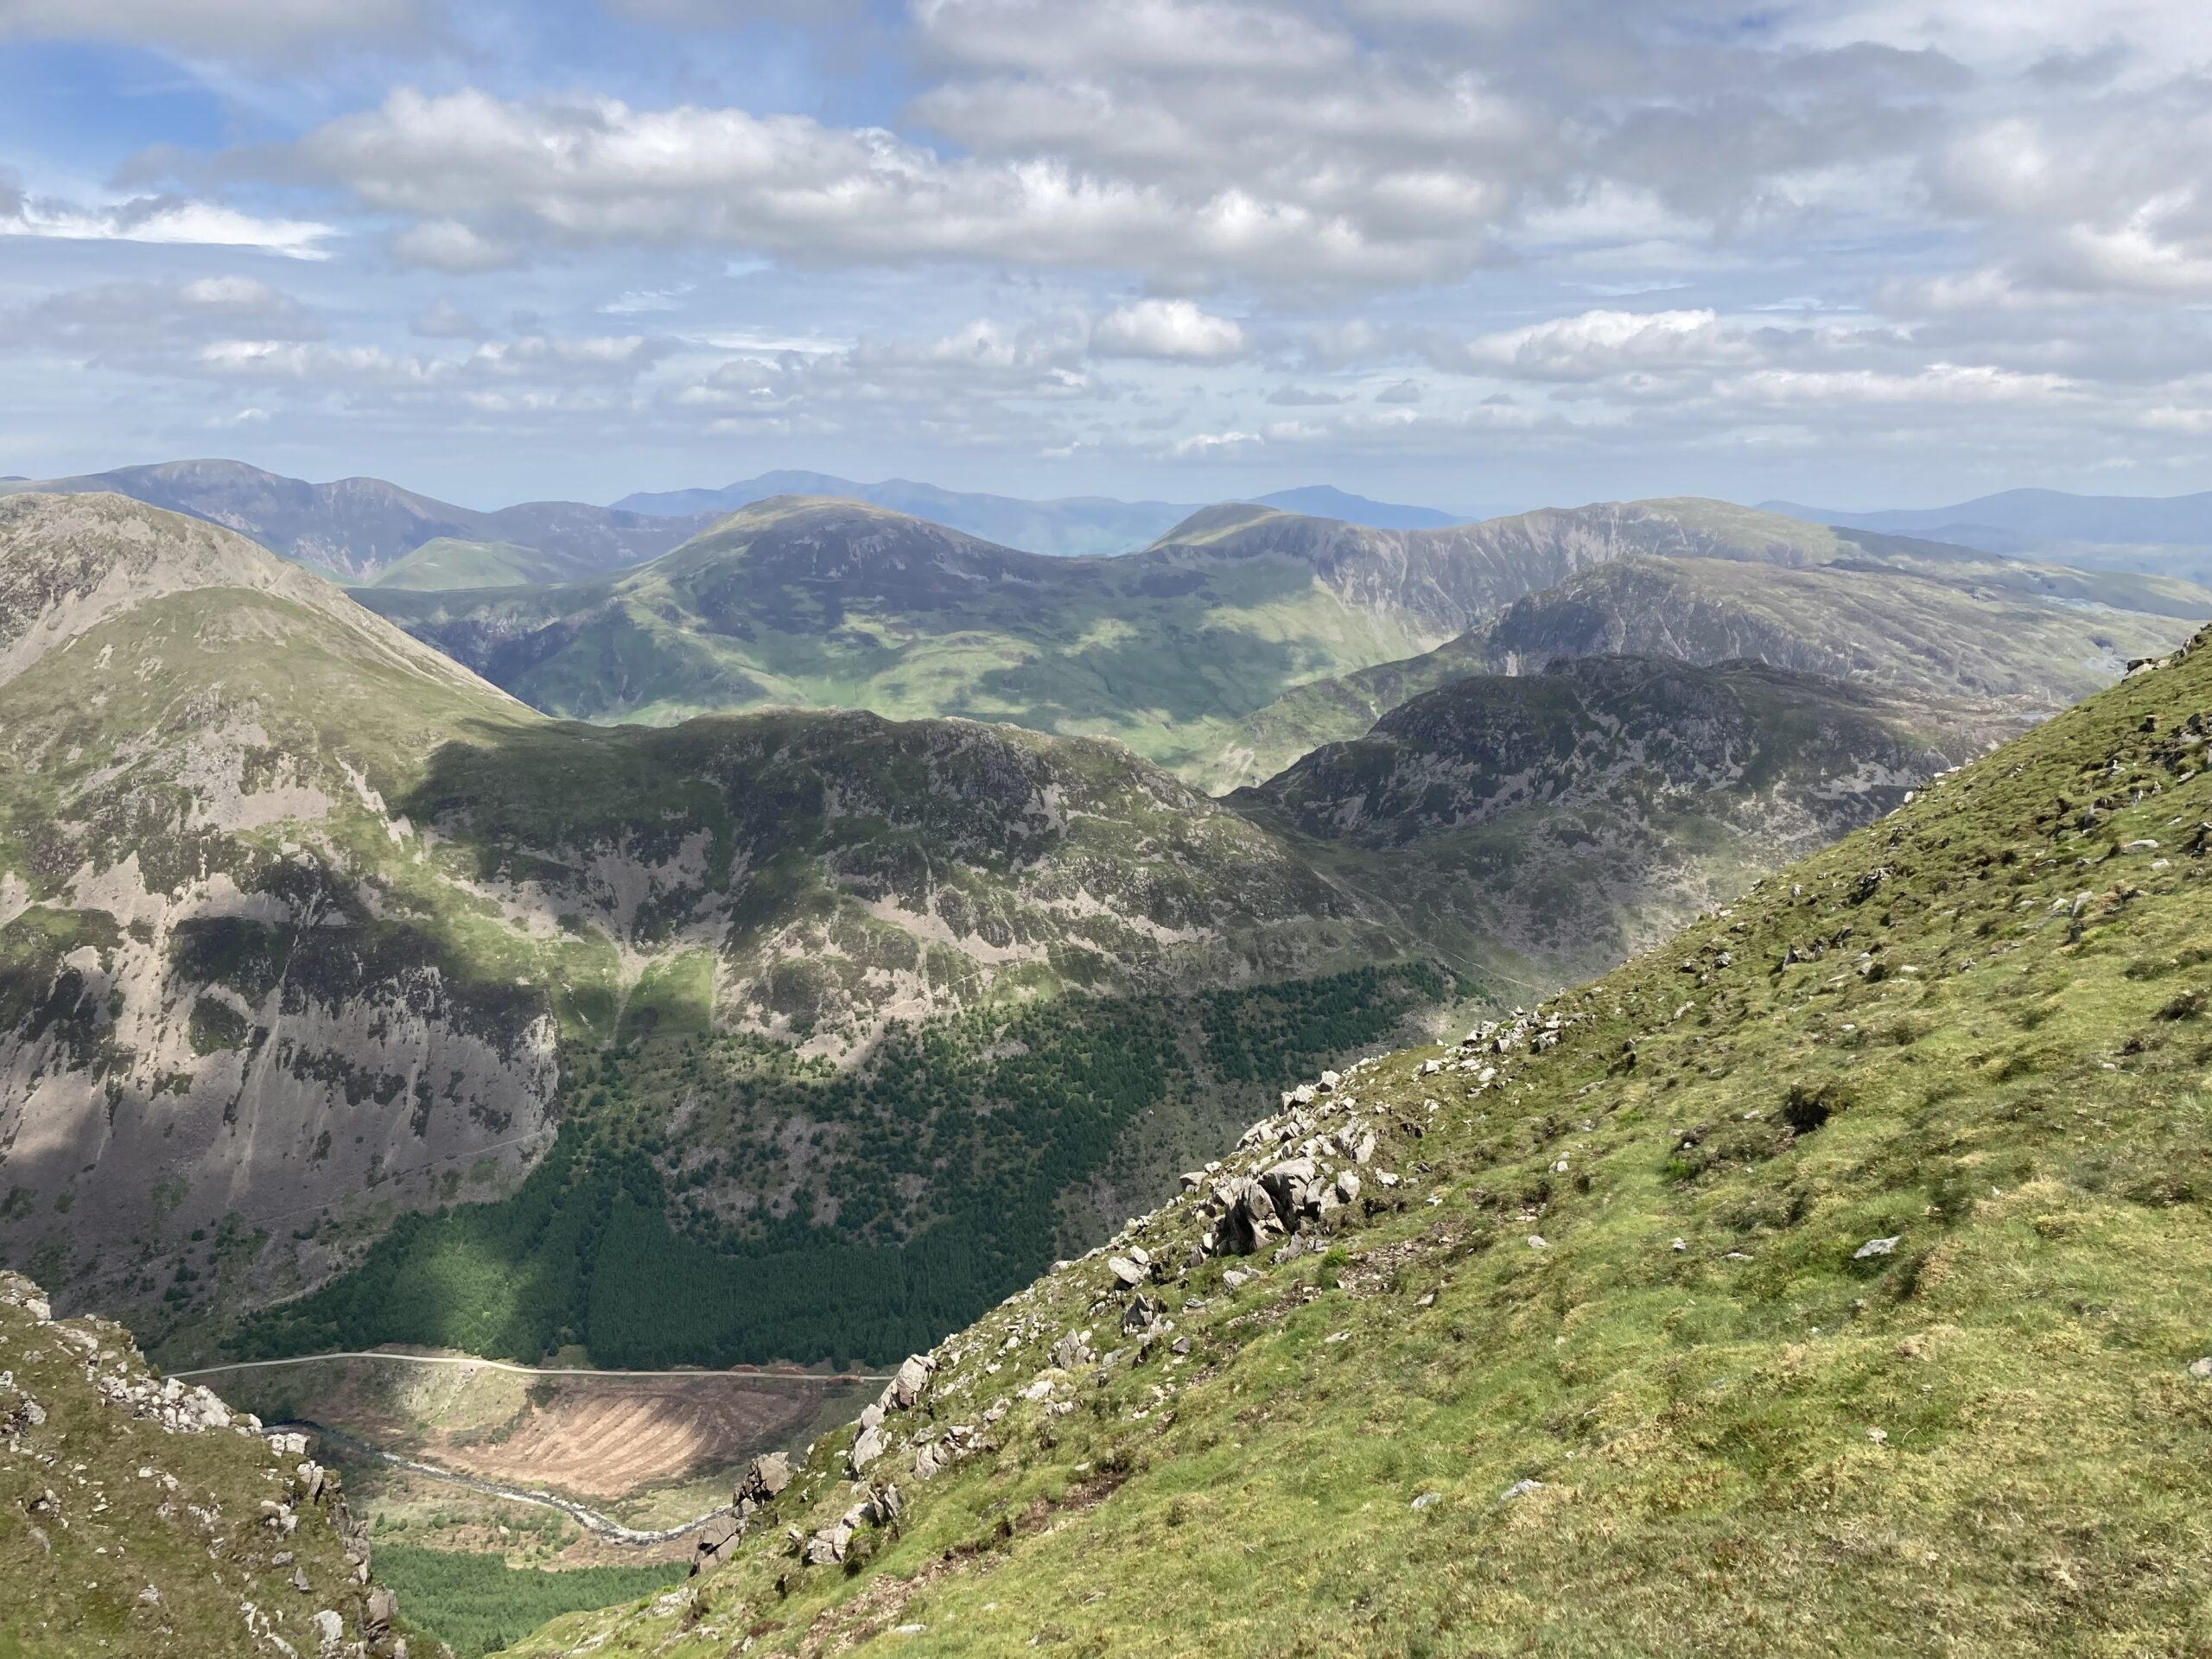 The fells of the Lake District National Park